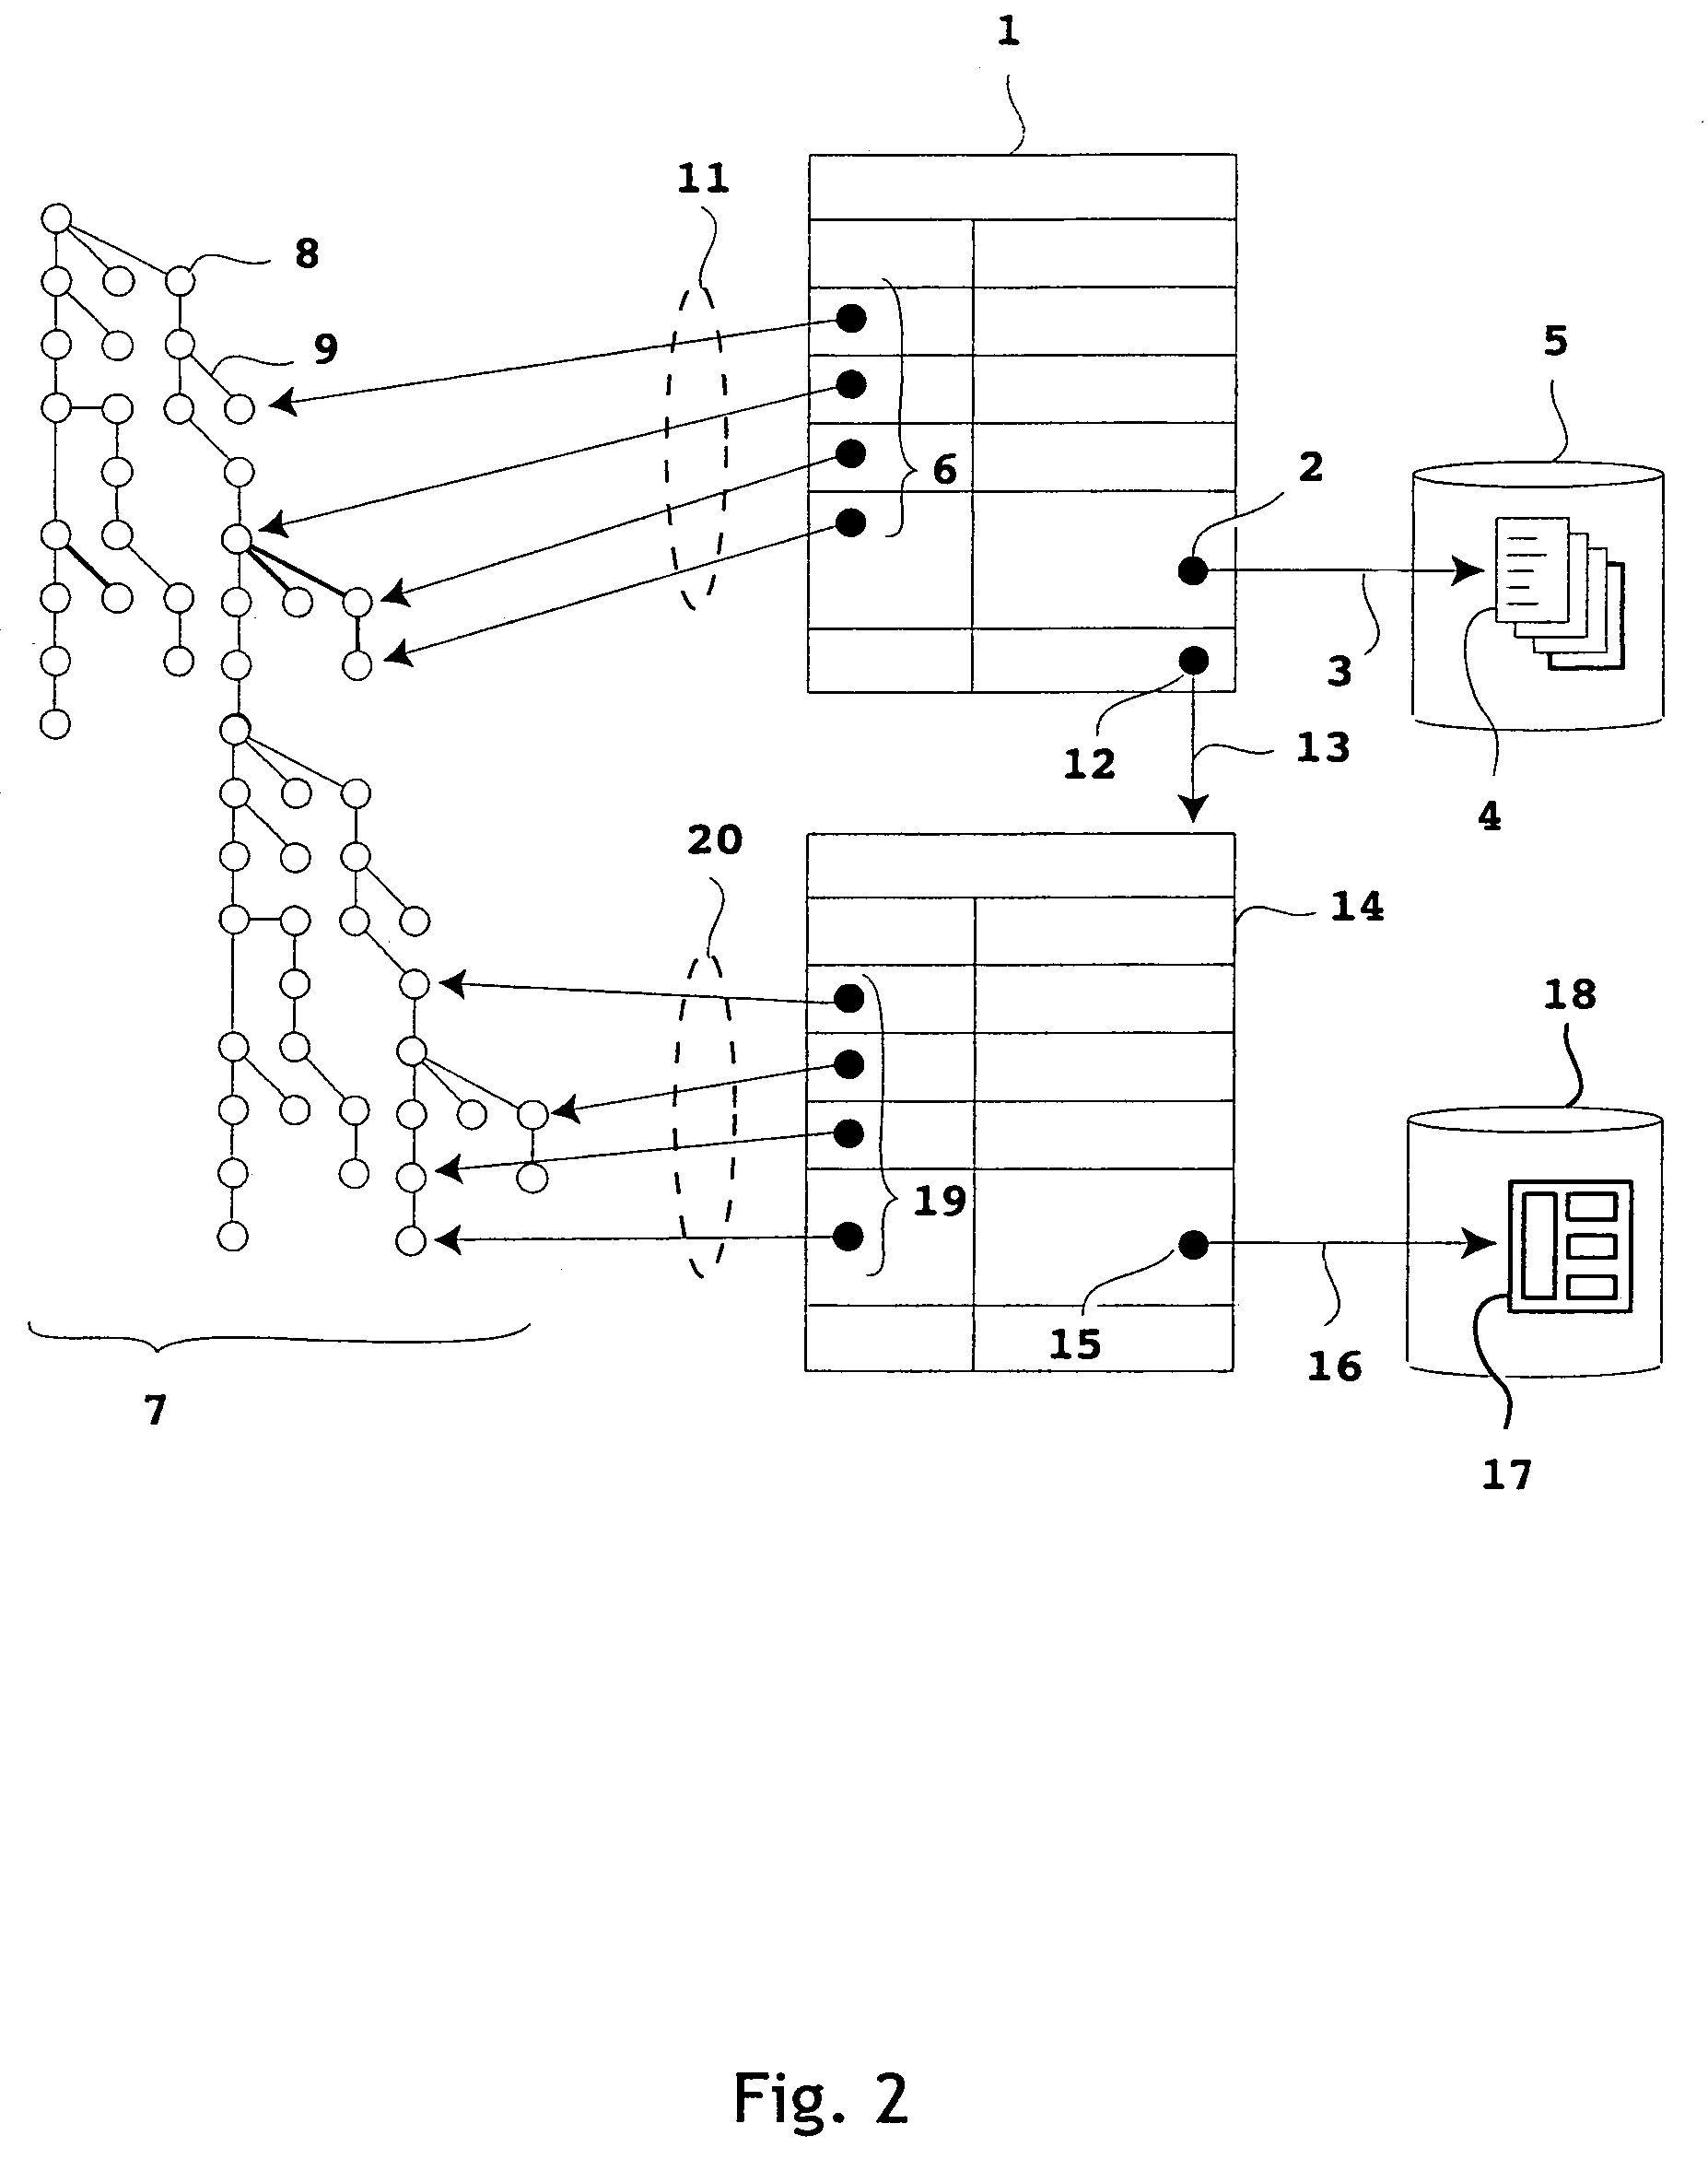 Method and system for managing and tracking semantic objects